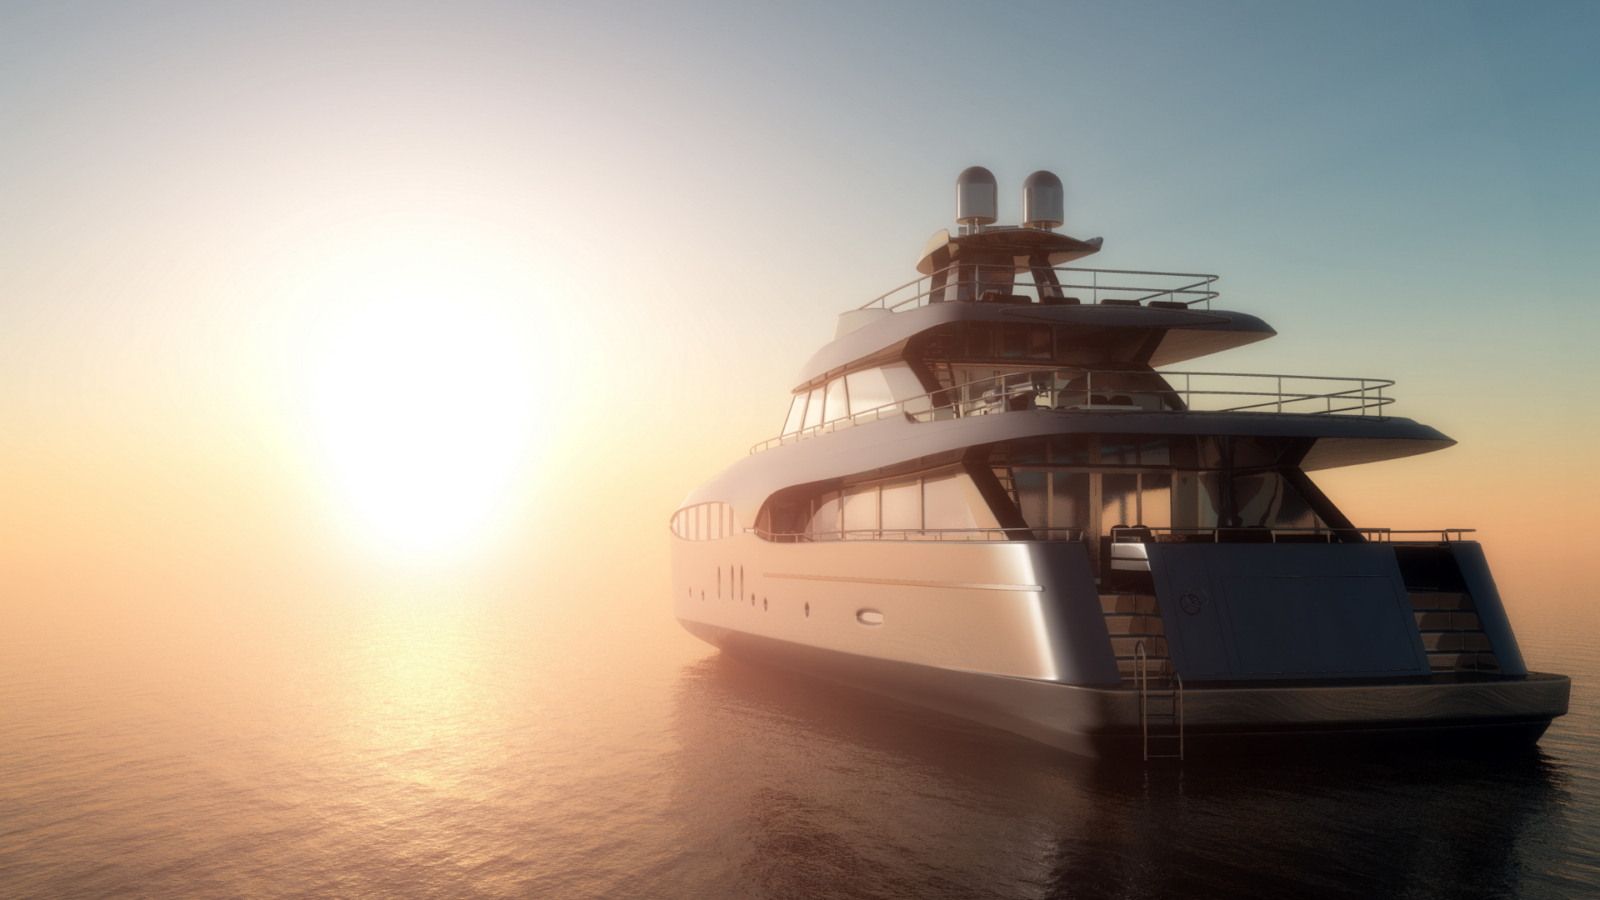 An image of a yacht that is now subject to the Government's Luxury Tax